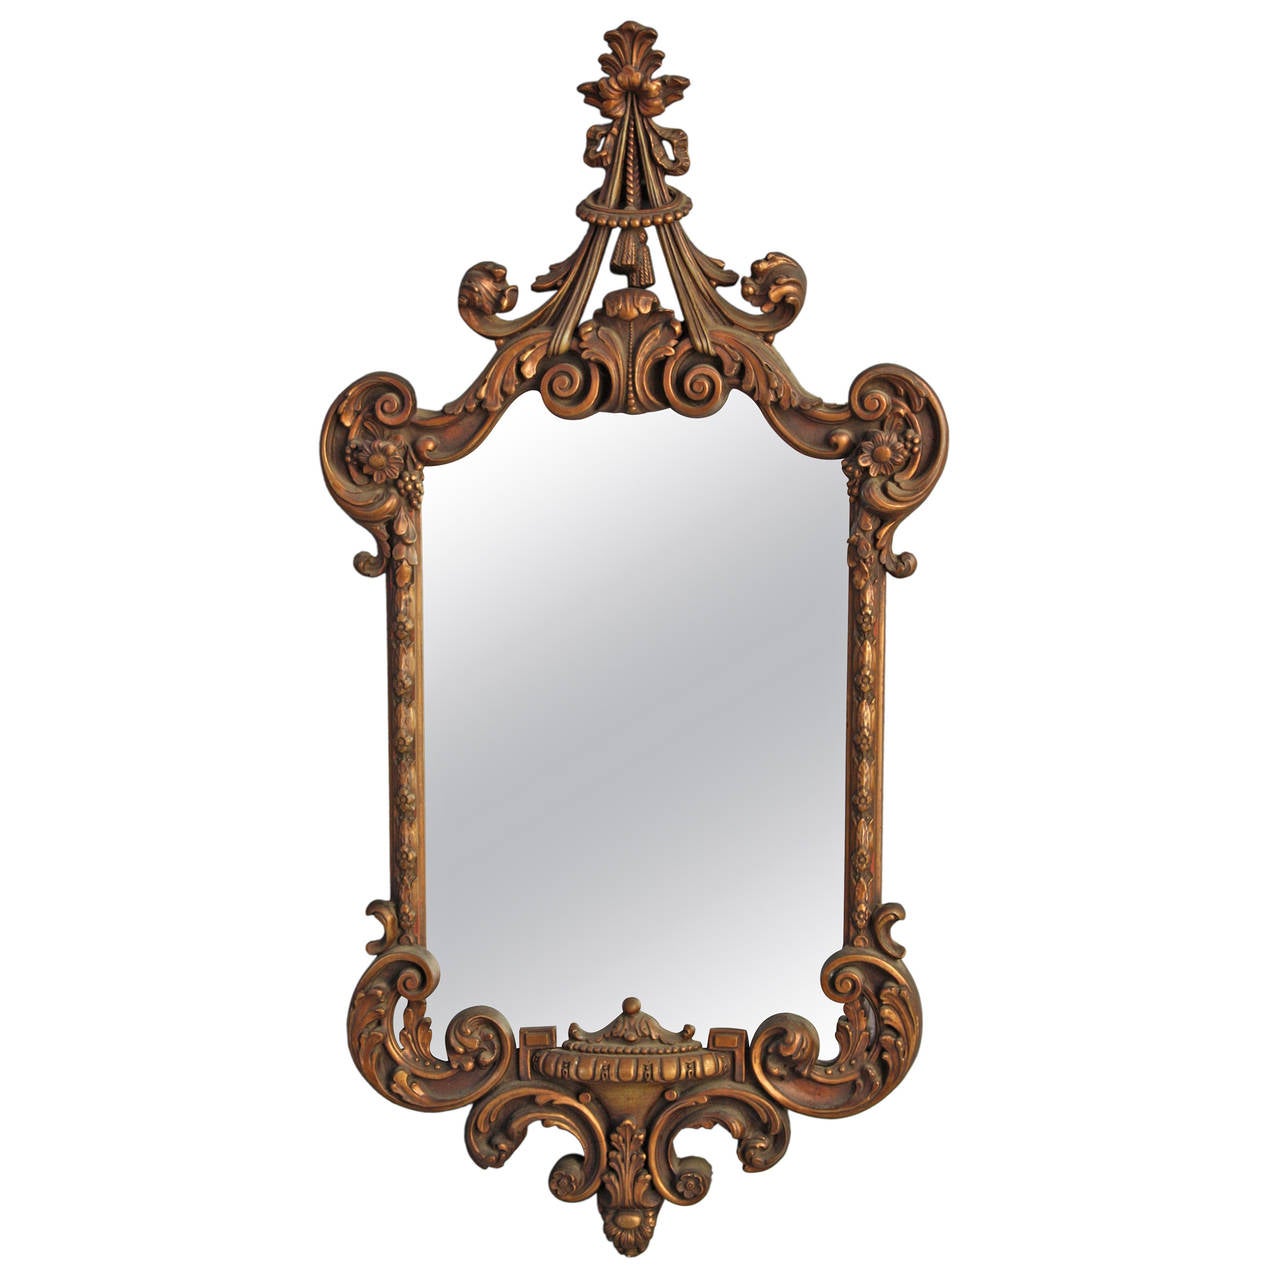 Antique Carved Wood Mirror, circa 1920s at 1stdibs